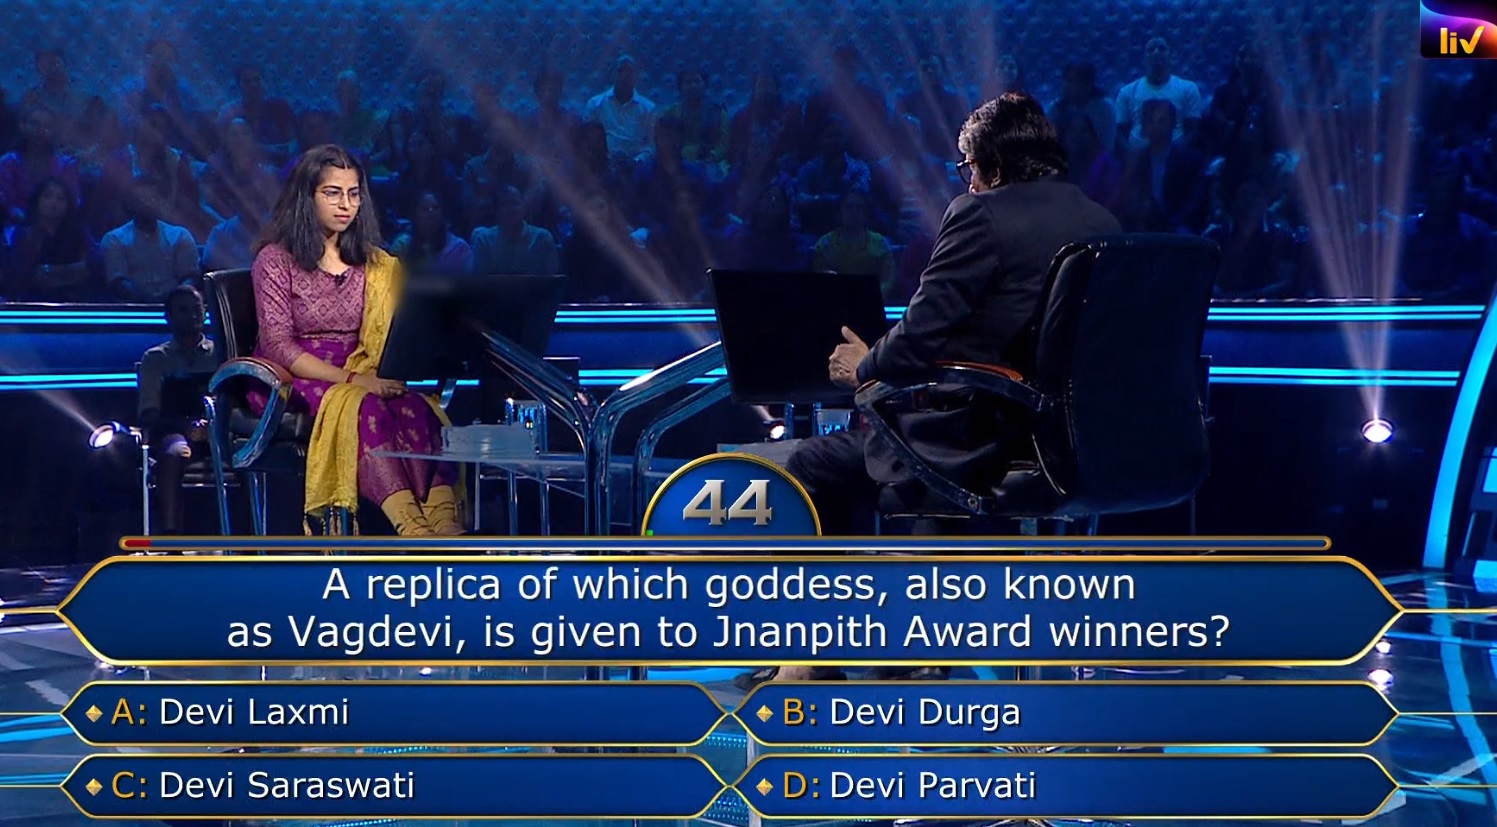 Ques : A replica of which goddess, also known as Vagdevi, is given to Jnanpith Award winners?